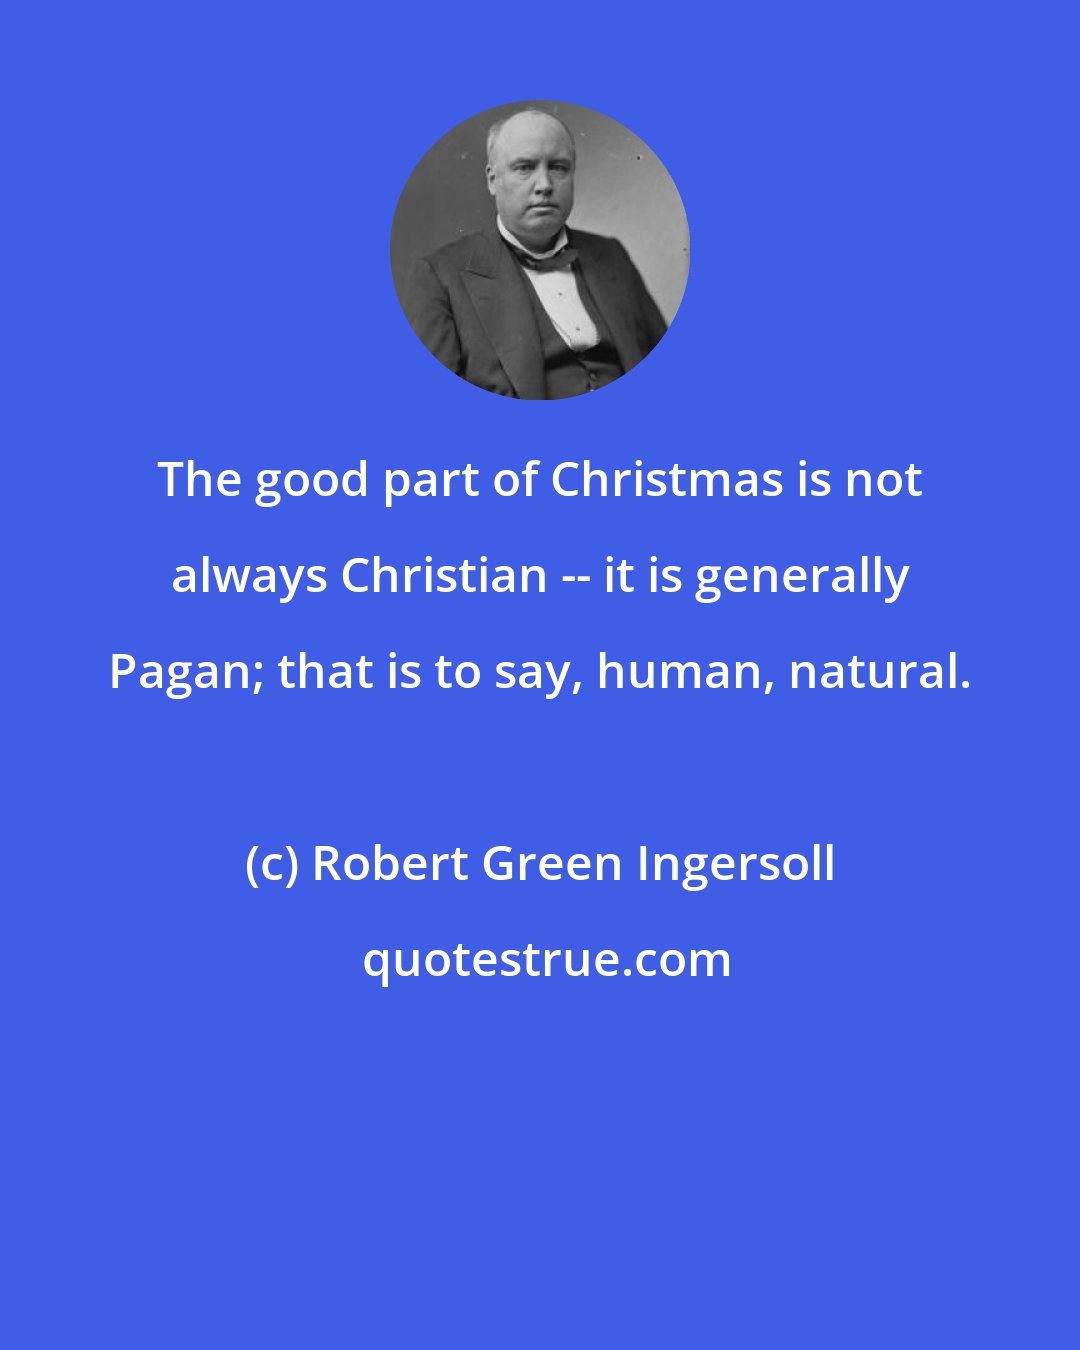 Robert Green Ingersoll: The good part of Christmas is not always Christian -- it is generally Pagan; that is to say, human, natural.